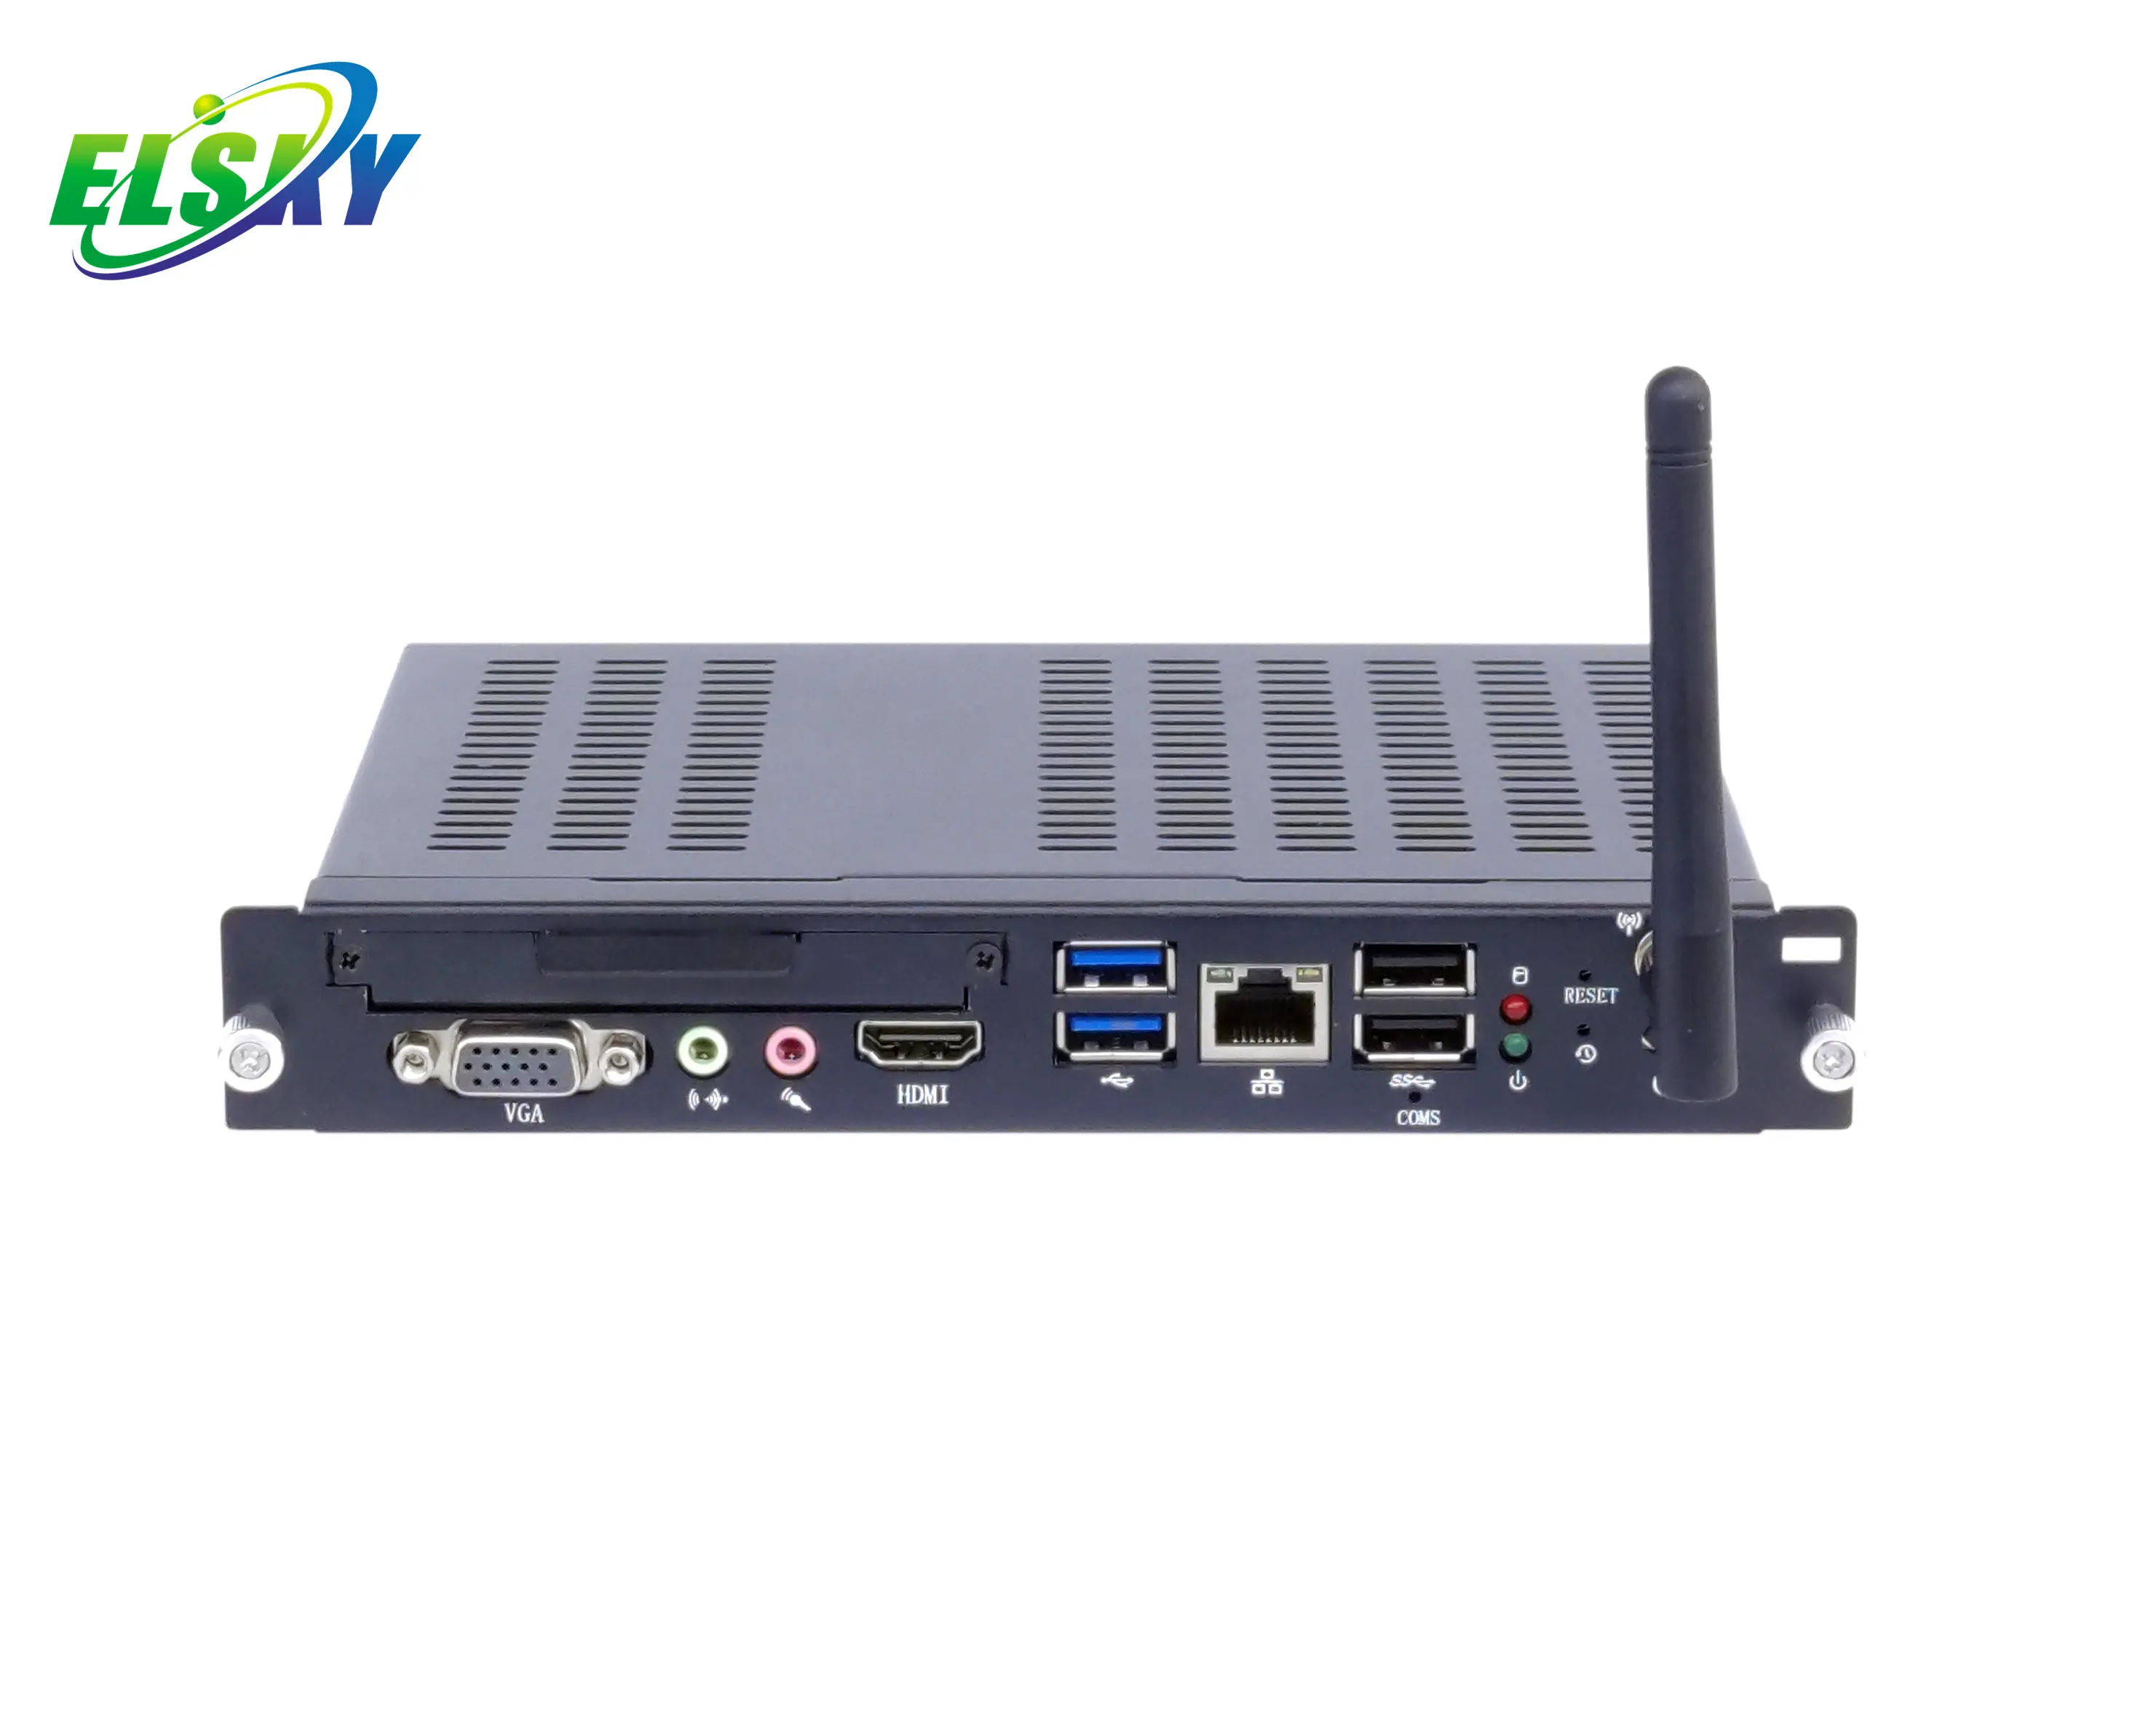 ELSKY OPS mini pc core i9 OPS450 with CPU Haswell-U 4th gen i7 HD Graphics 4400/5500 2*USB3.0 2*USB2.0 1*80PIN OPS slot